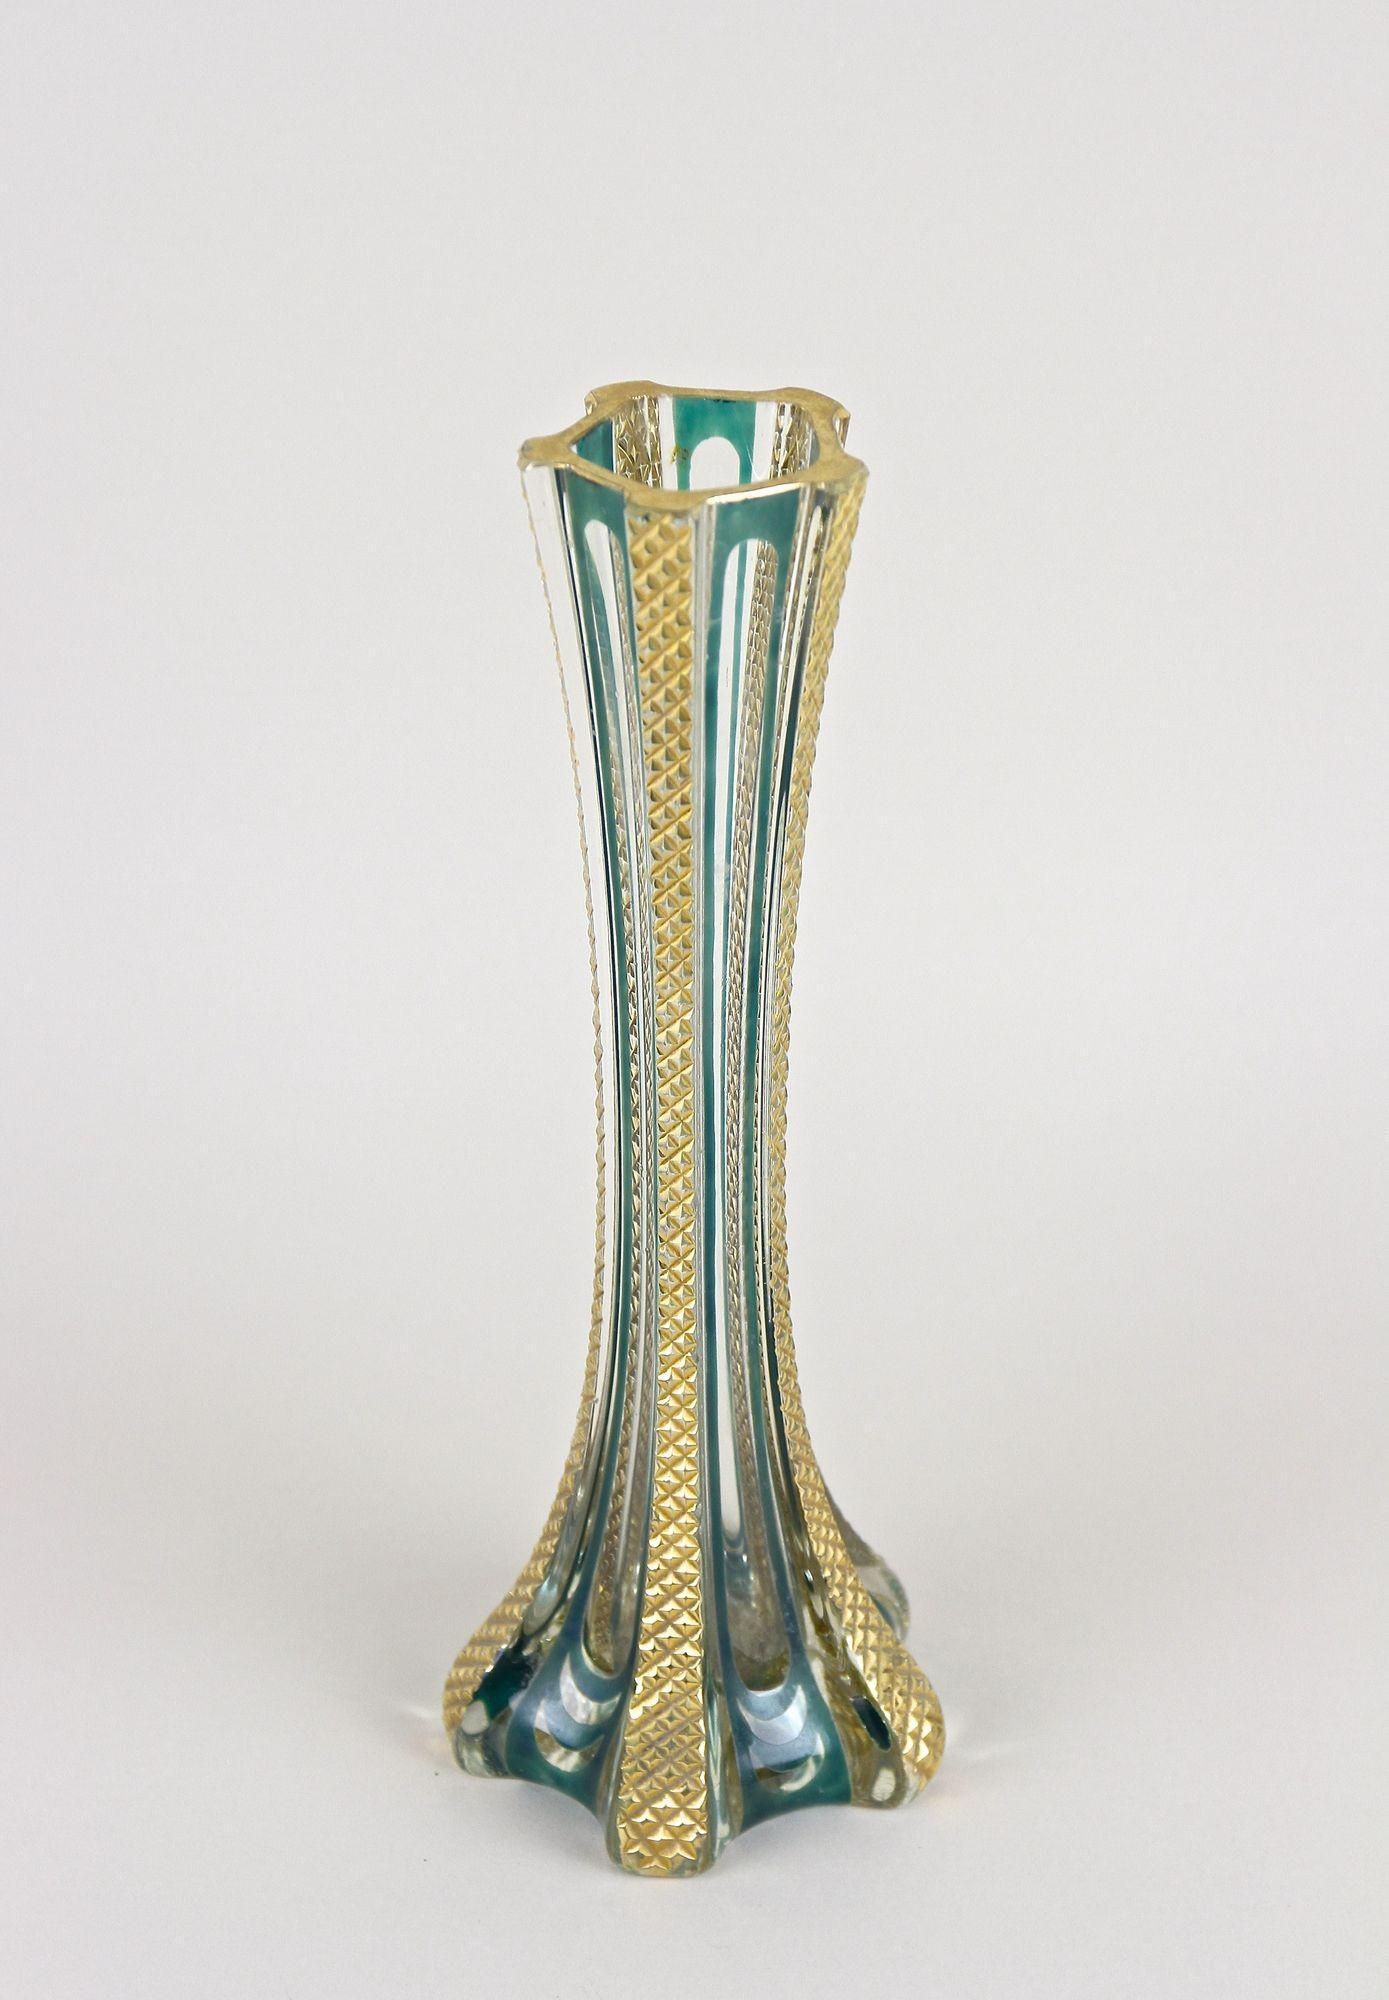 Absolute rare 20th century Murano glass vase from the period around 1930 in Italy. Early murano pieces in such great original condition like this one are really hard to find nowadays. The elegantly, pentagonal shaped body is looking for its equal